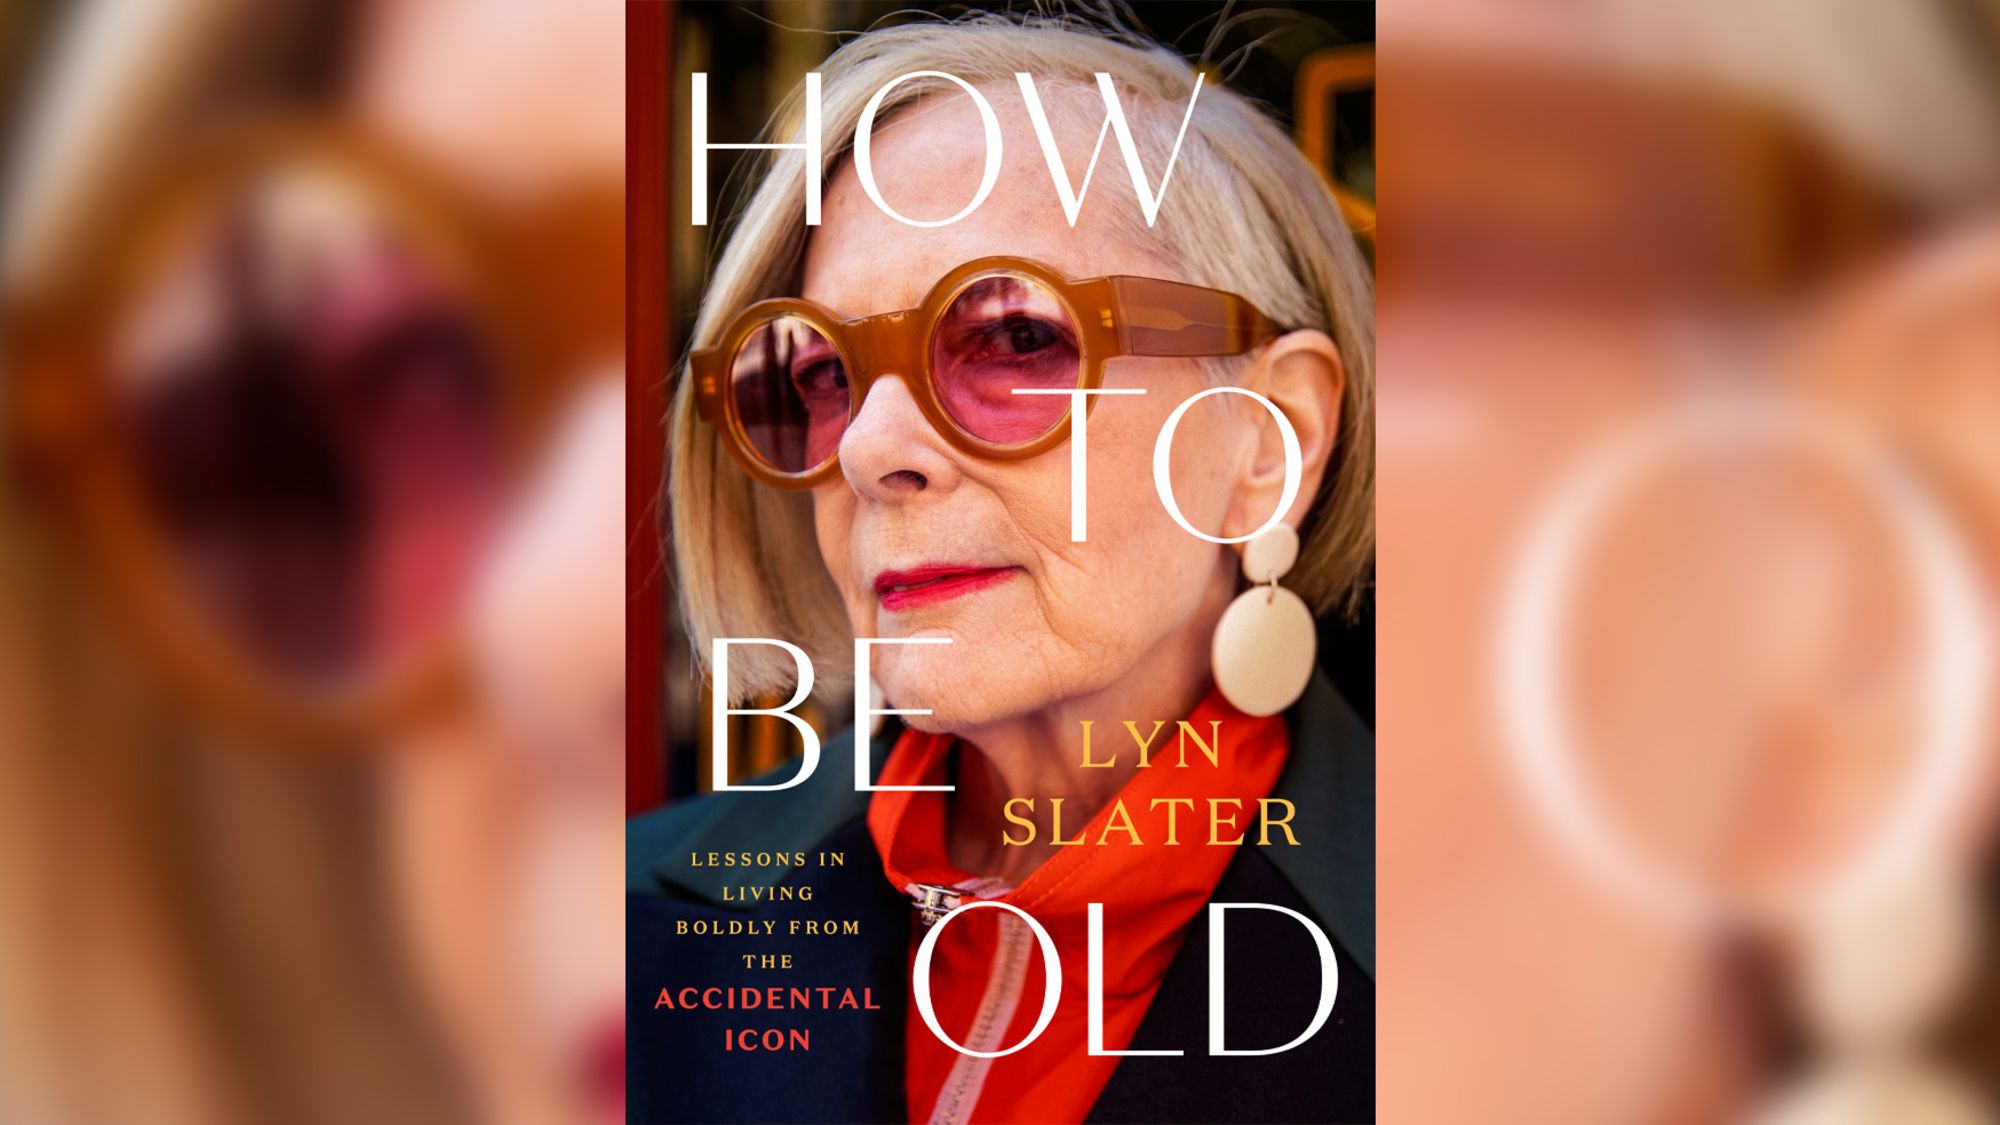 "How to Be Old: Lessons in Living Boldly From the Accidental Icon" is an empowering new memoir from fashion influencer Lyn Slater.